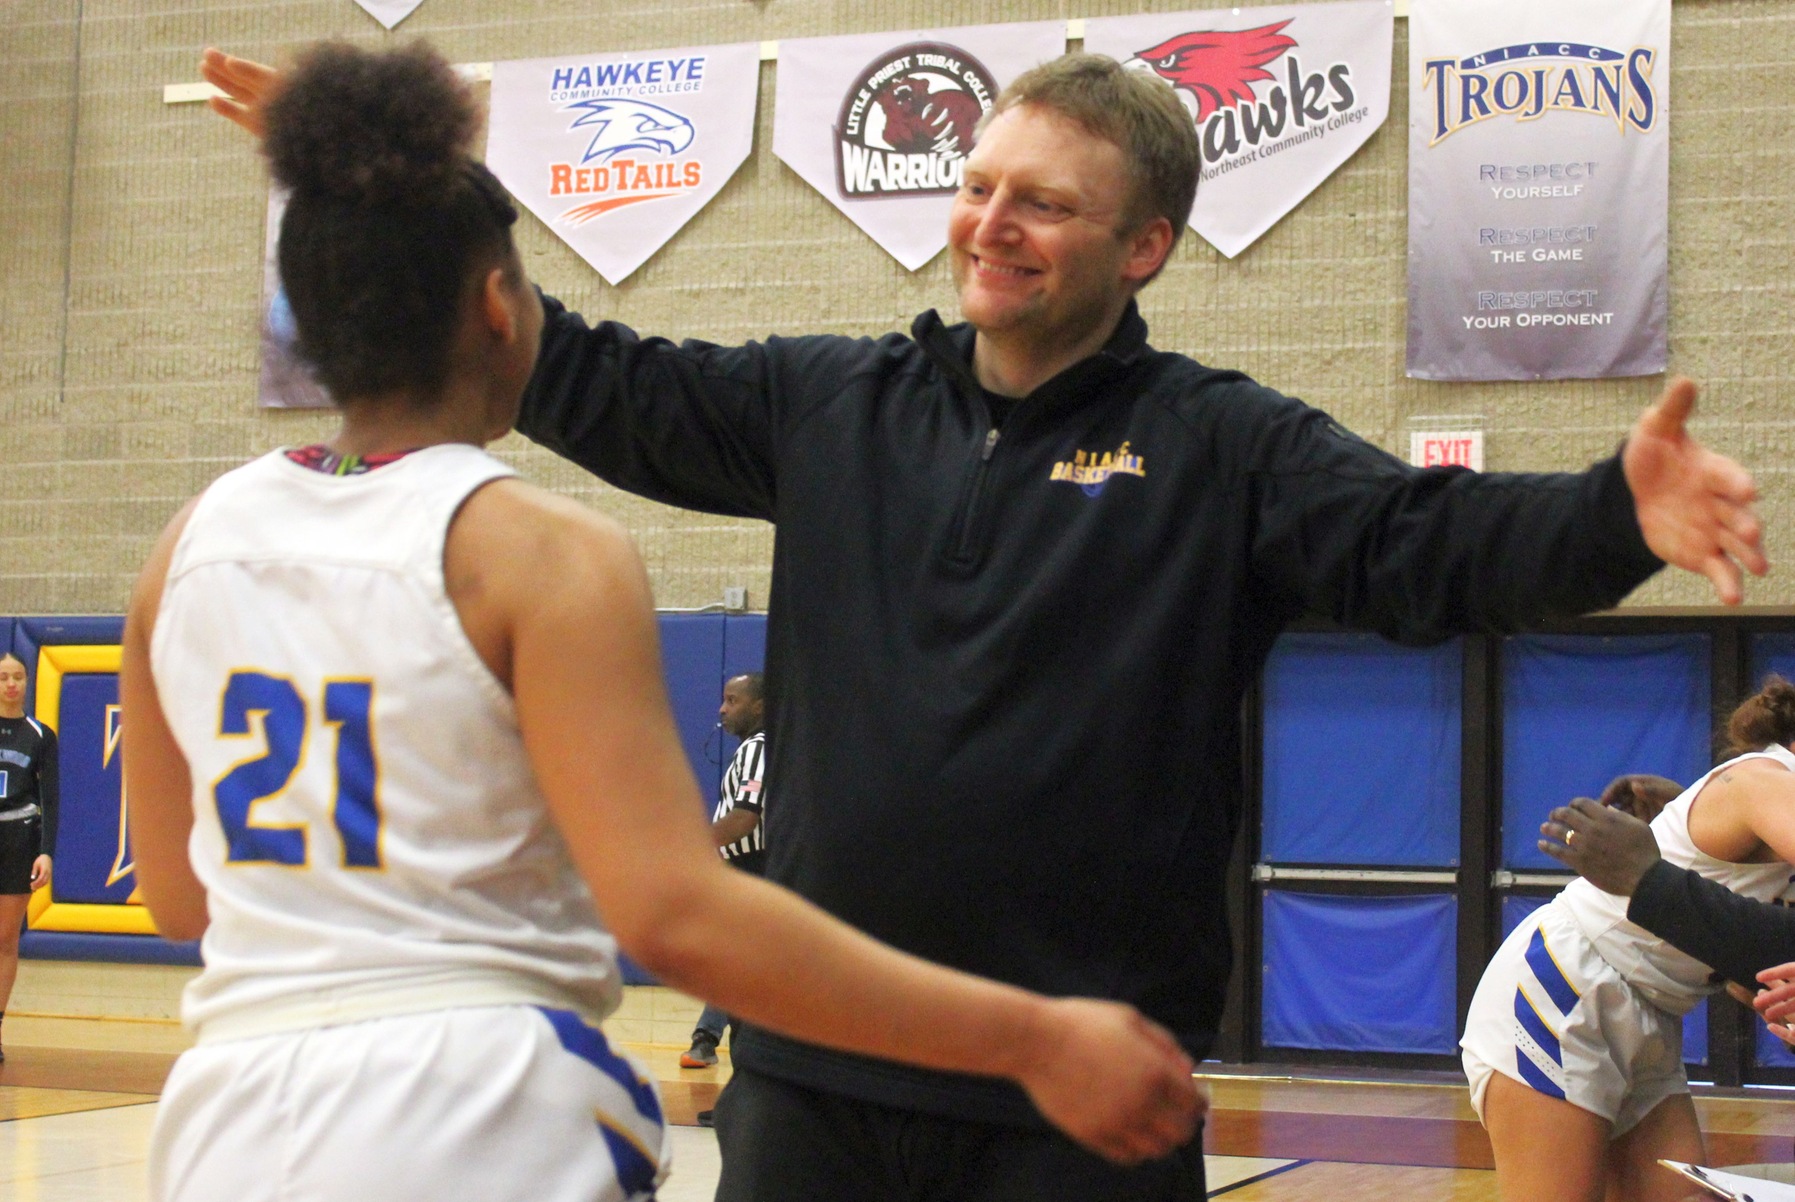 Todd Ciochetto guided NIACC to its second straight regional title.